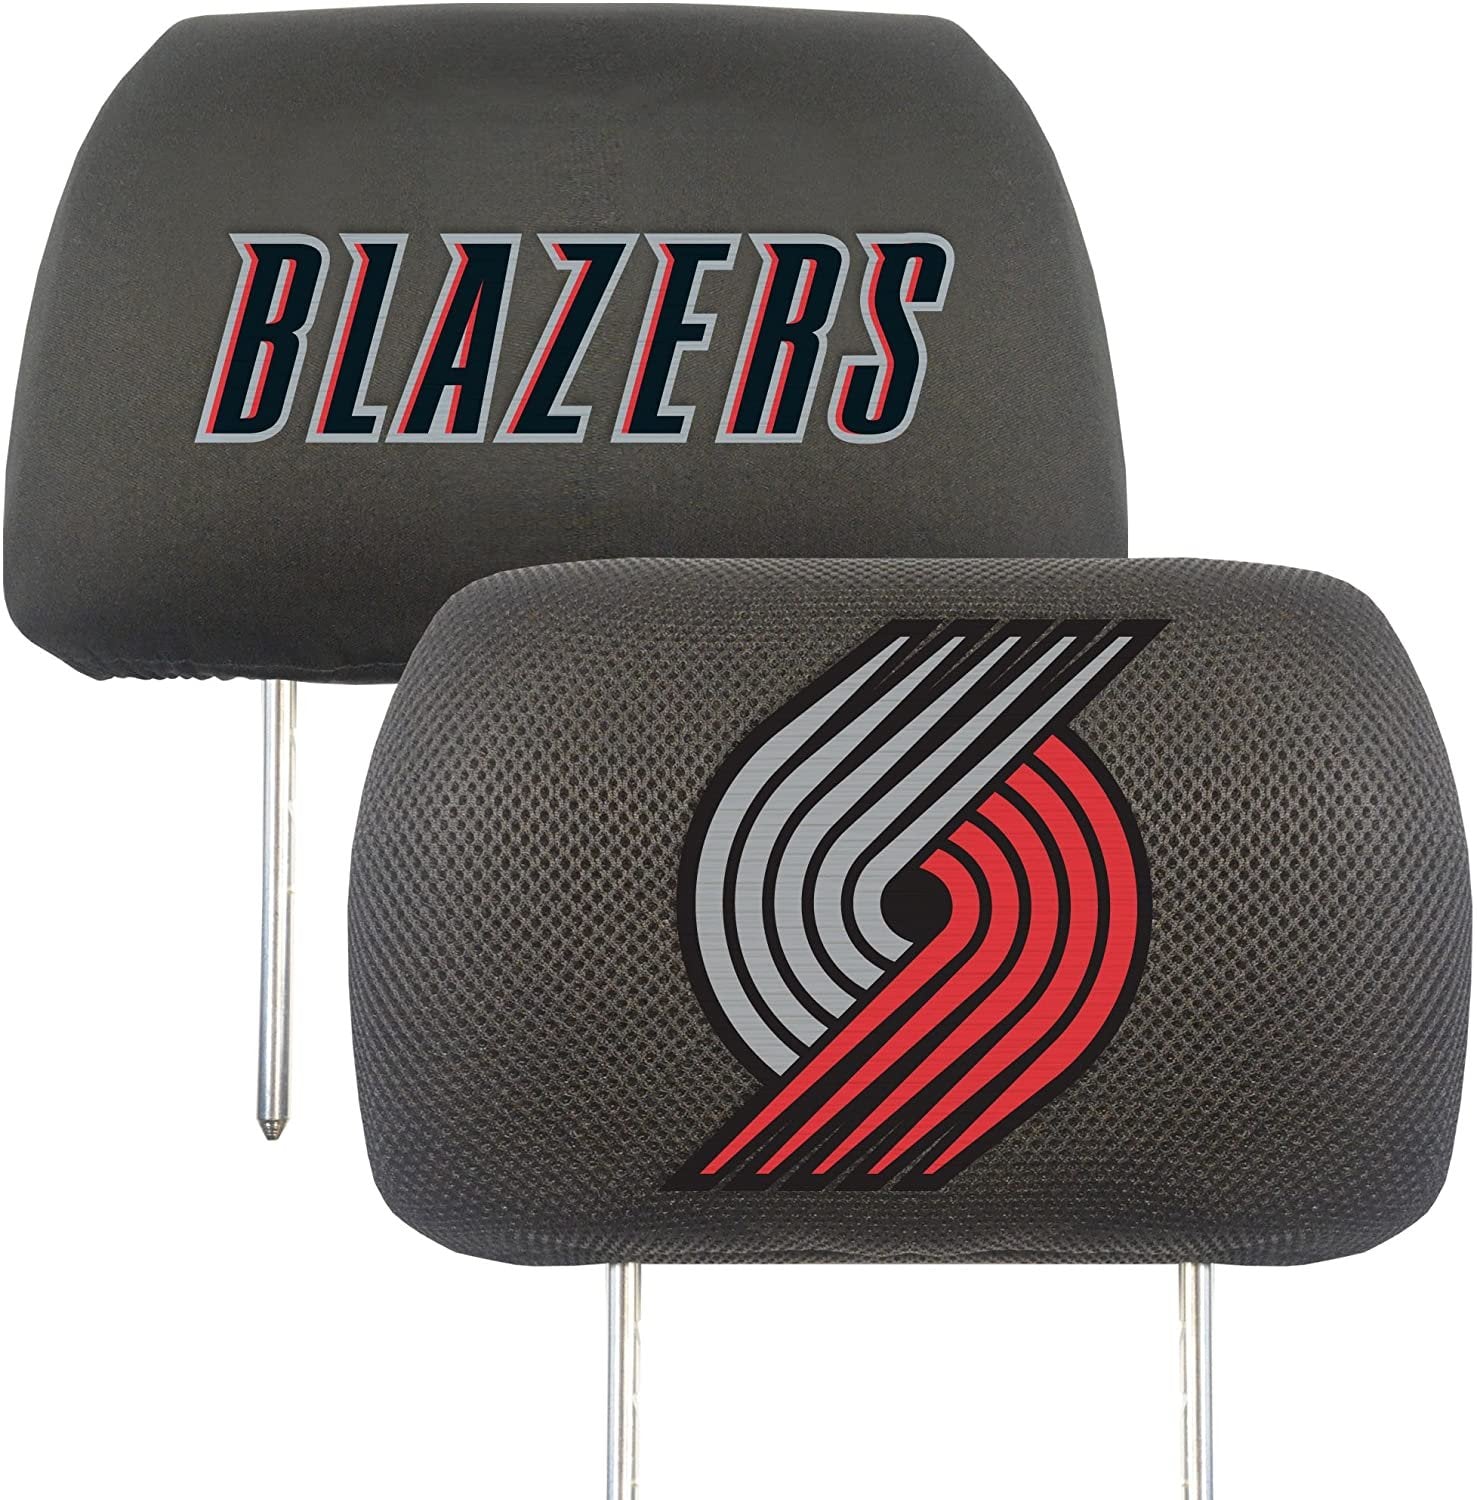 Portland Trail Blazers Pair of Premium Auto Head Rest Covers, Embroidered, Black Elastic, 14x10 Inch